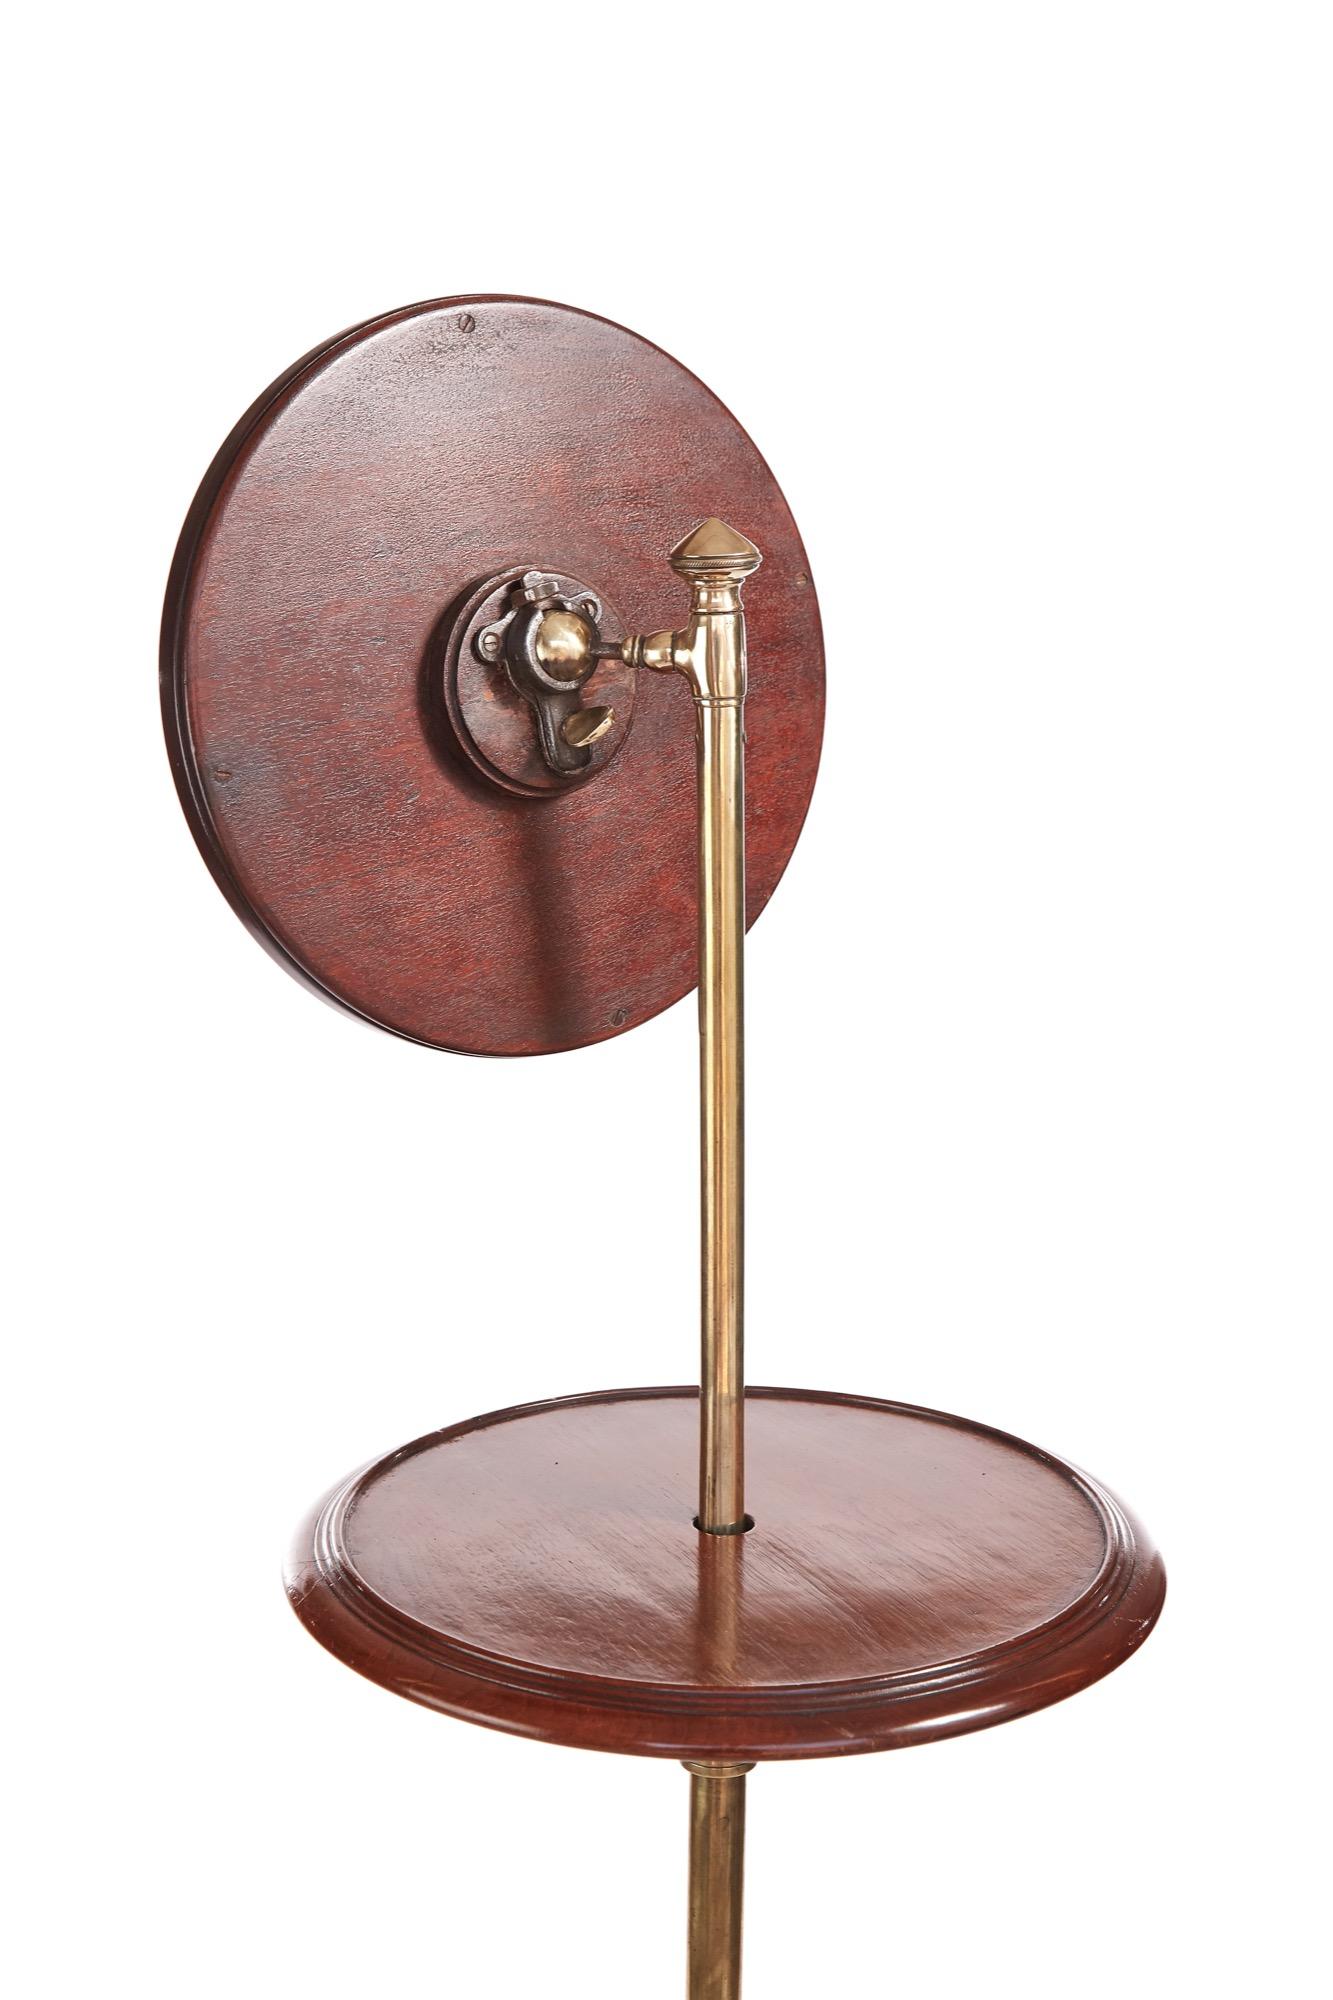 Fine quality antique Victorian telescopic shaving stand having an adjustable fine carved mahogany framed mirror. Fine quality carved mahogany circular table top supported by original brass adjustable telescopic pole raised on a fine quality twisted